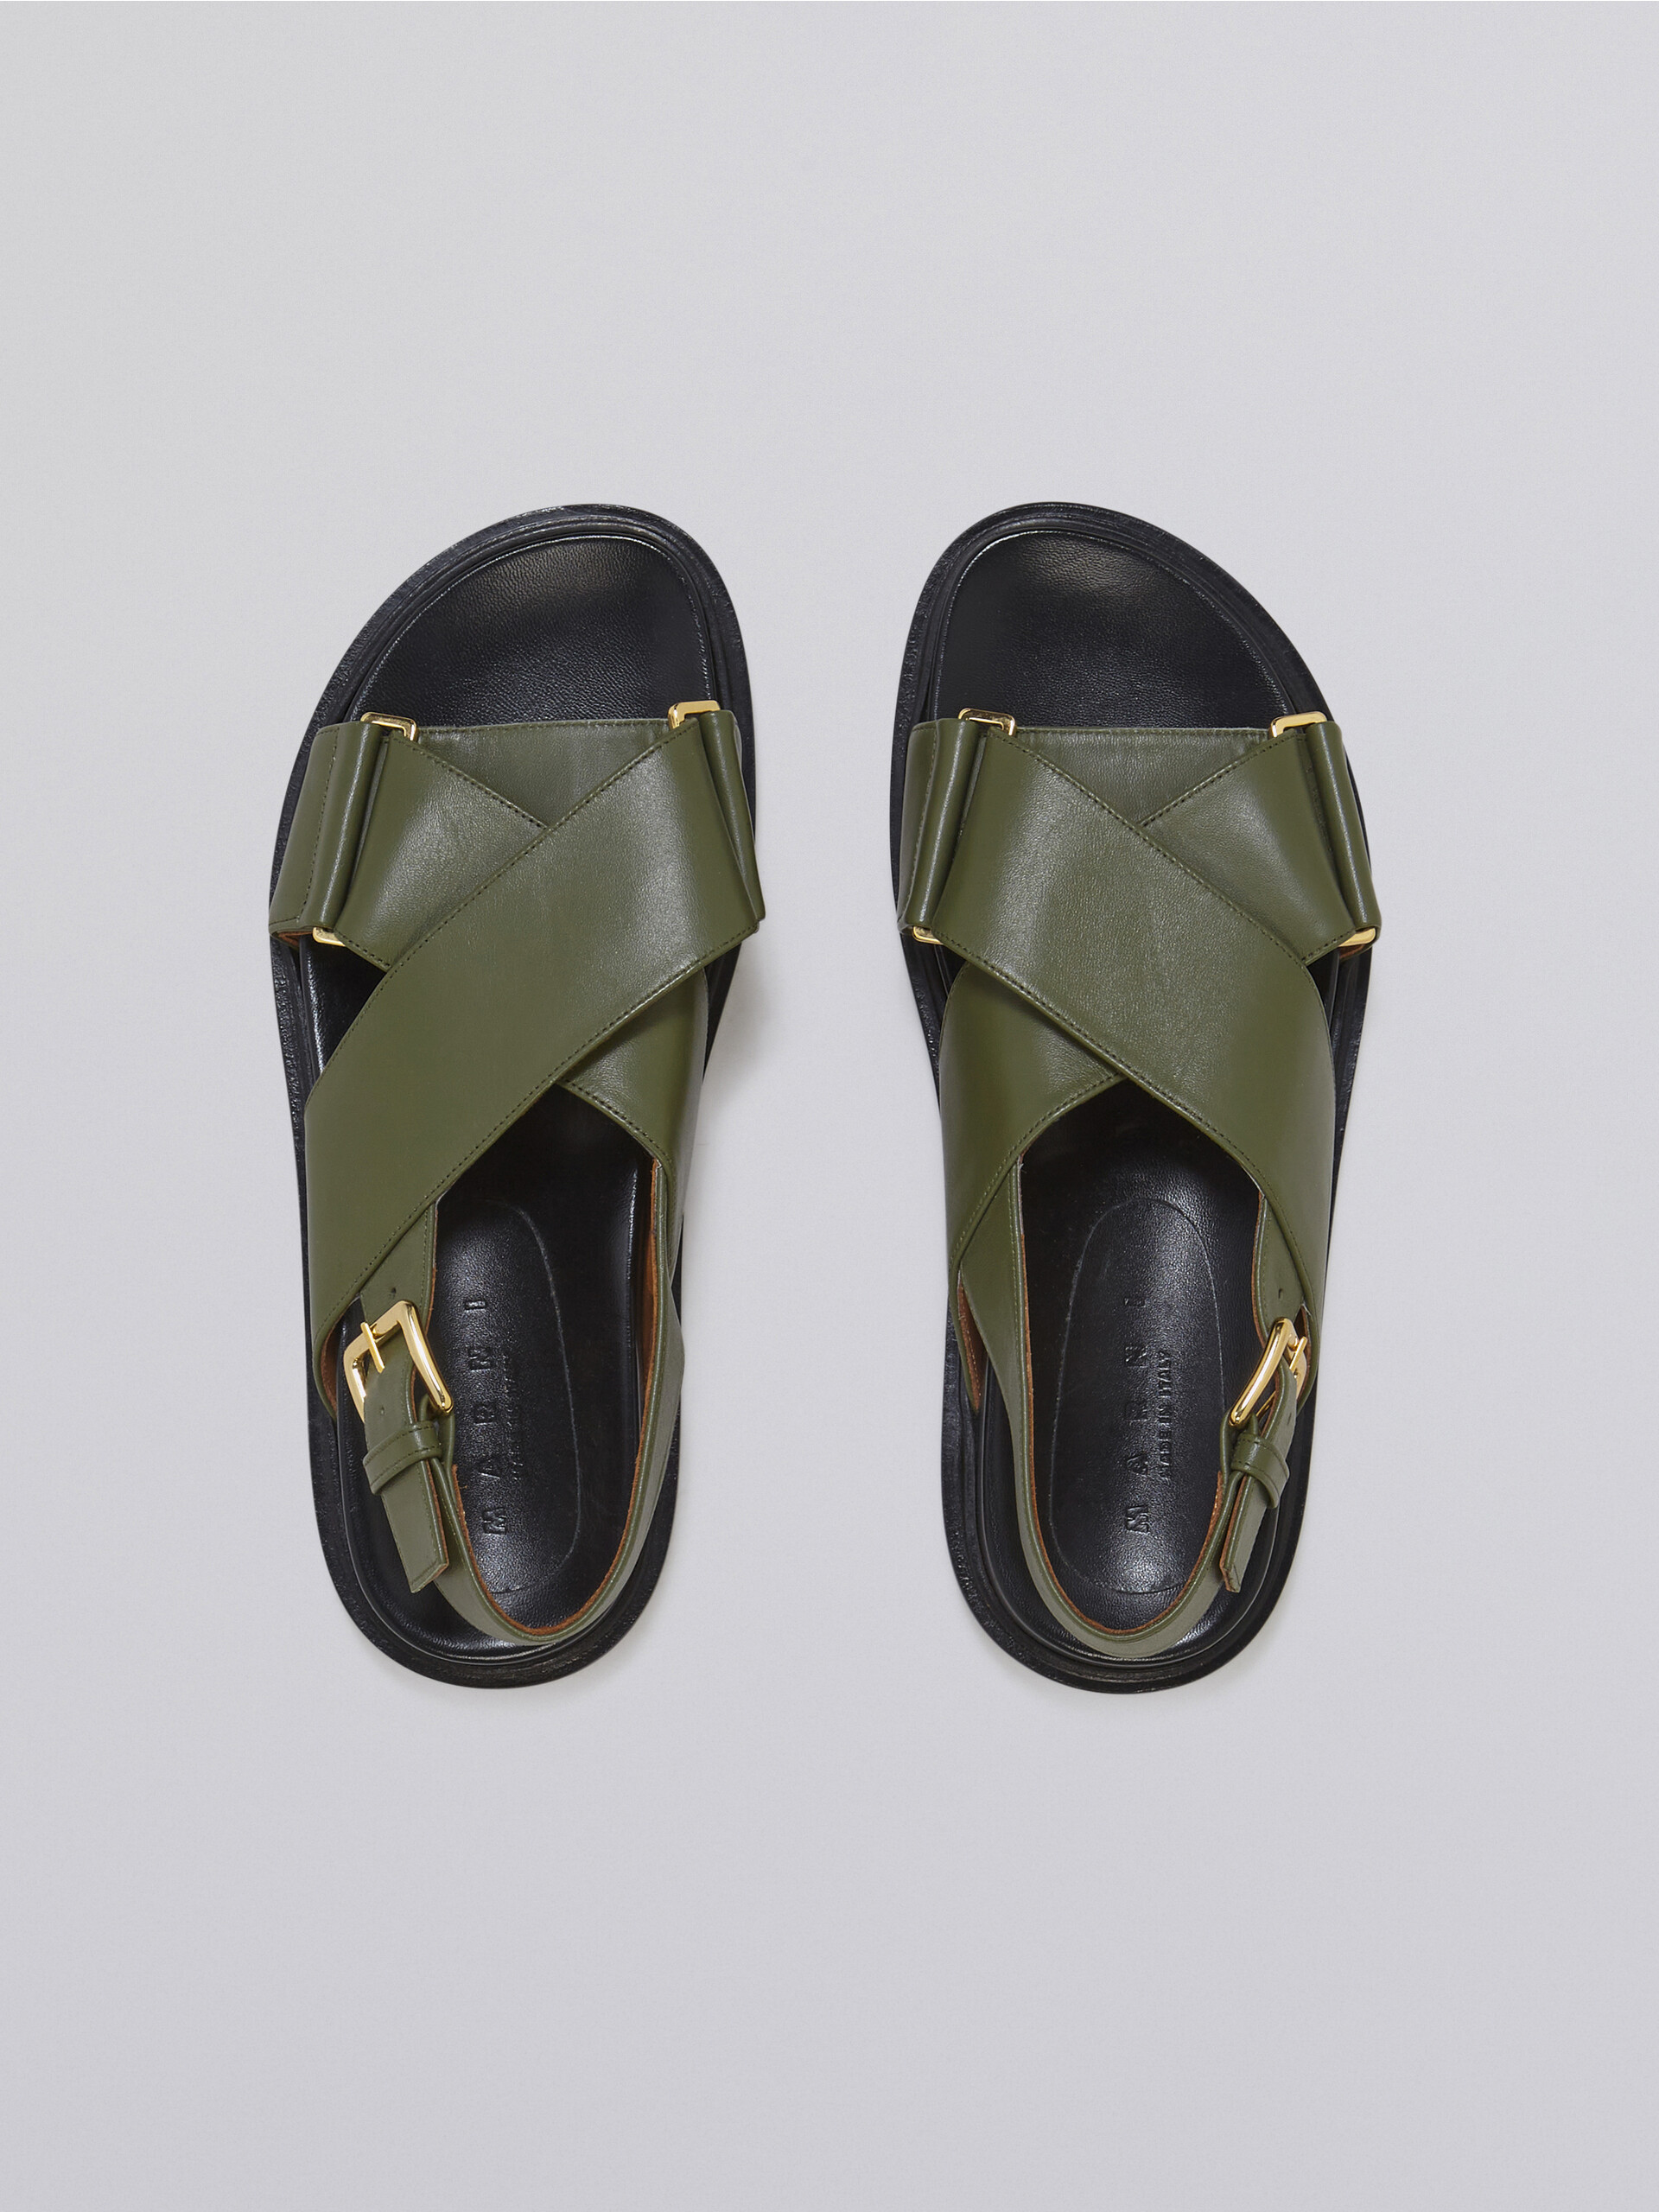 Green smooth calf leather fussbett - Sandals - Image 4